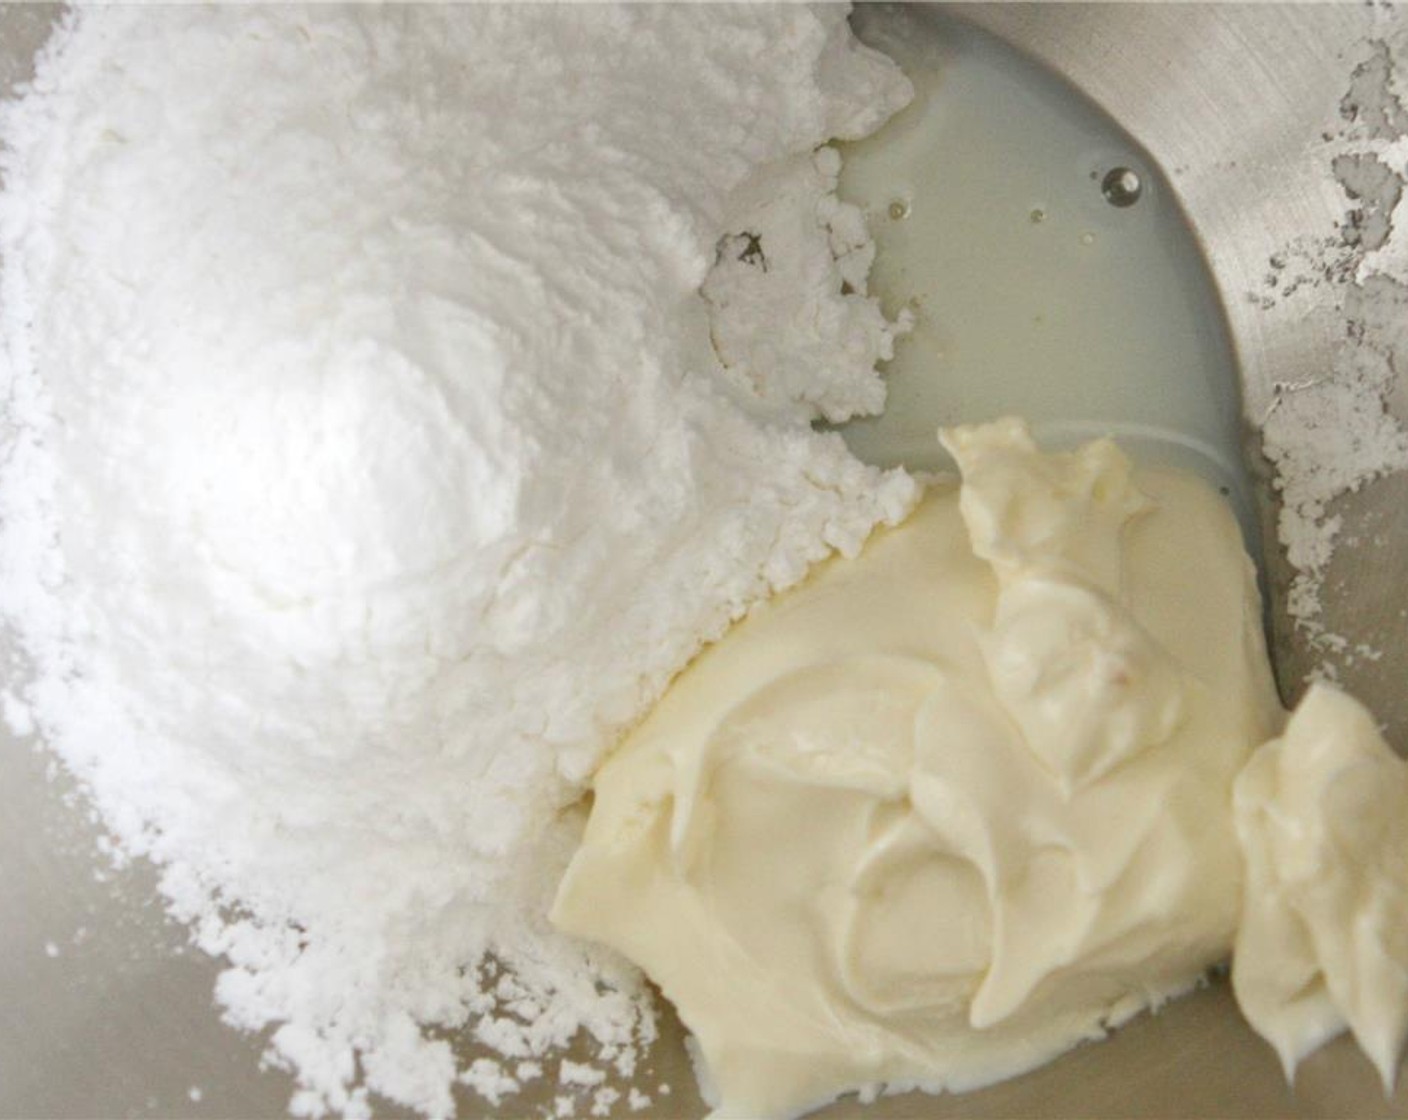 step 1 In a small bowl, combine Powdered Confectioners Sugar (1 cup), Philadelphia Original Soft Cheese (1/2 cup), and Milk (1 cup).  Stir until creamy, adding an additional tablespoon of milk, if needed. Set aside, this will be your glaze for later.